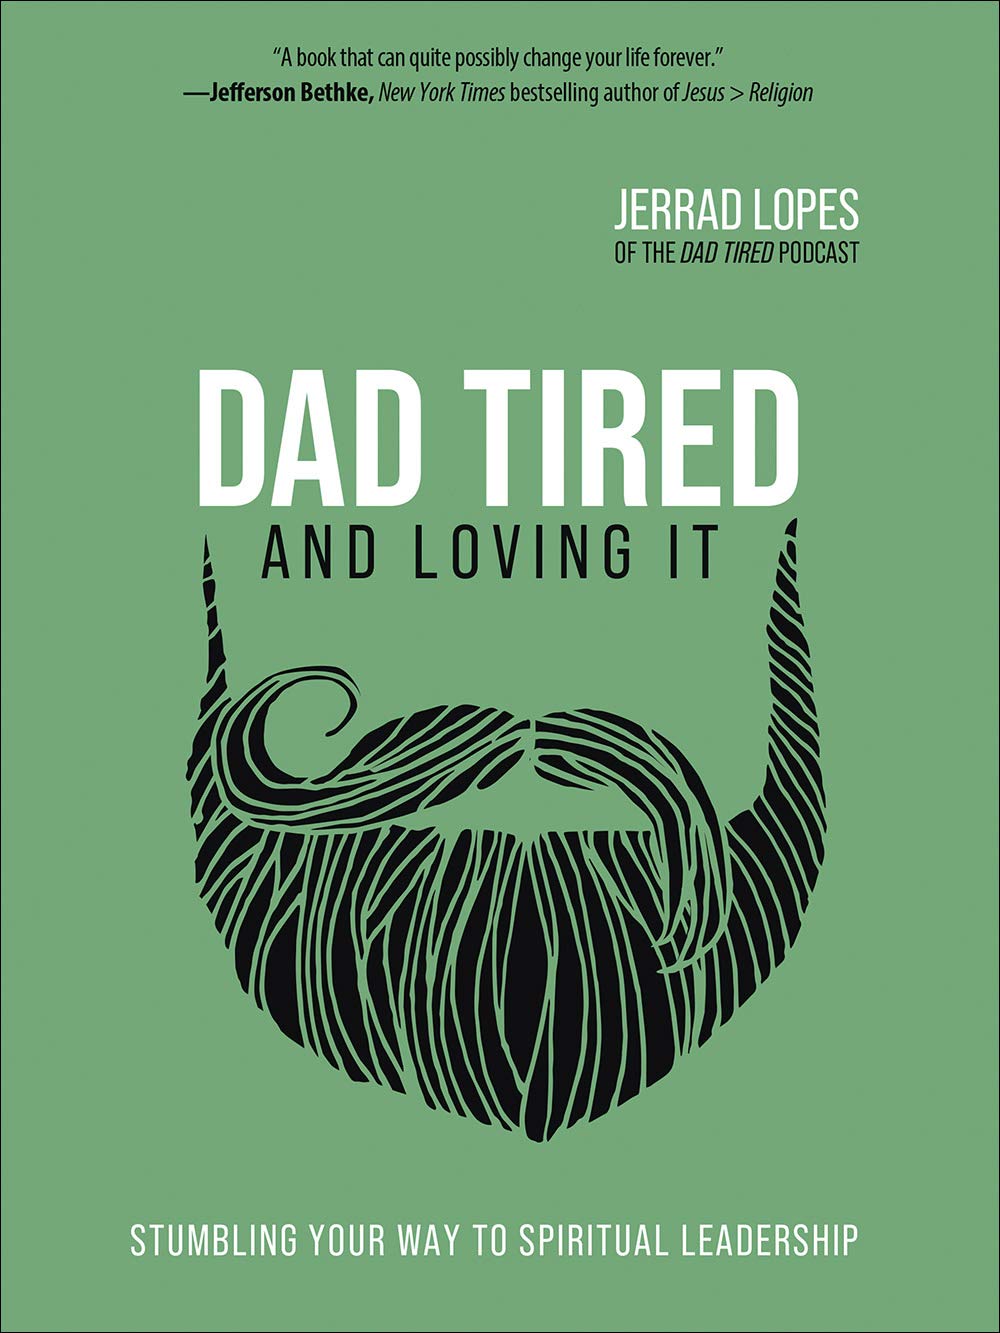 Dad Tired and Loving it Jerrad Lopes